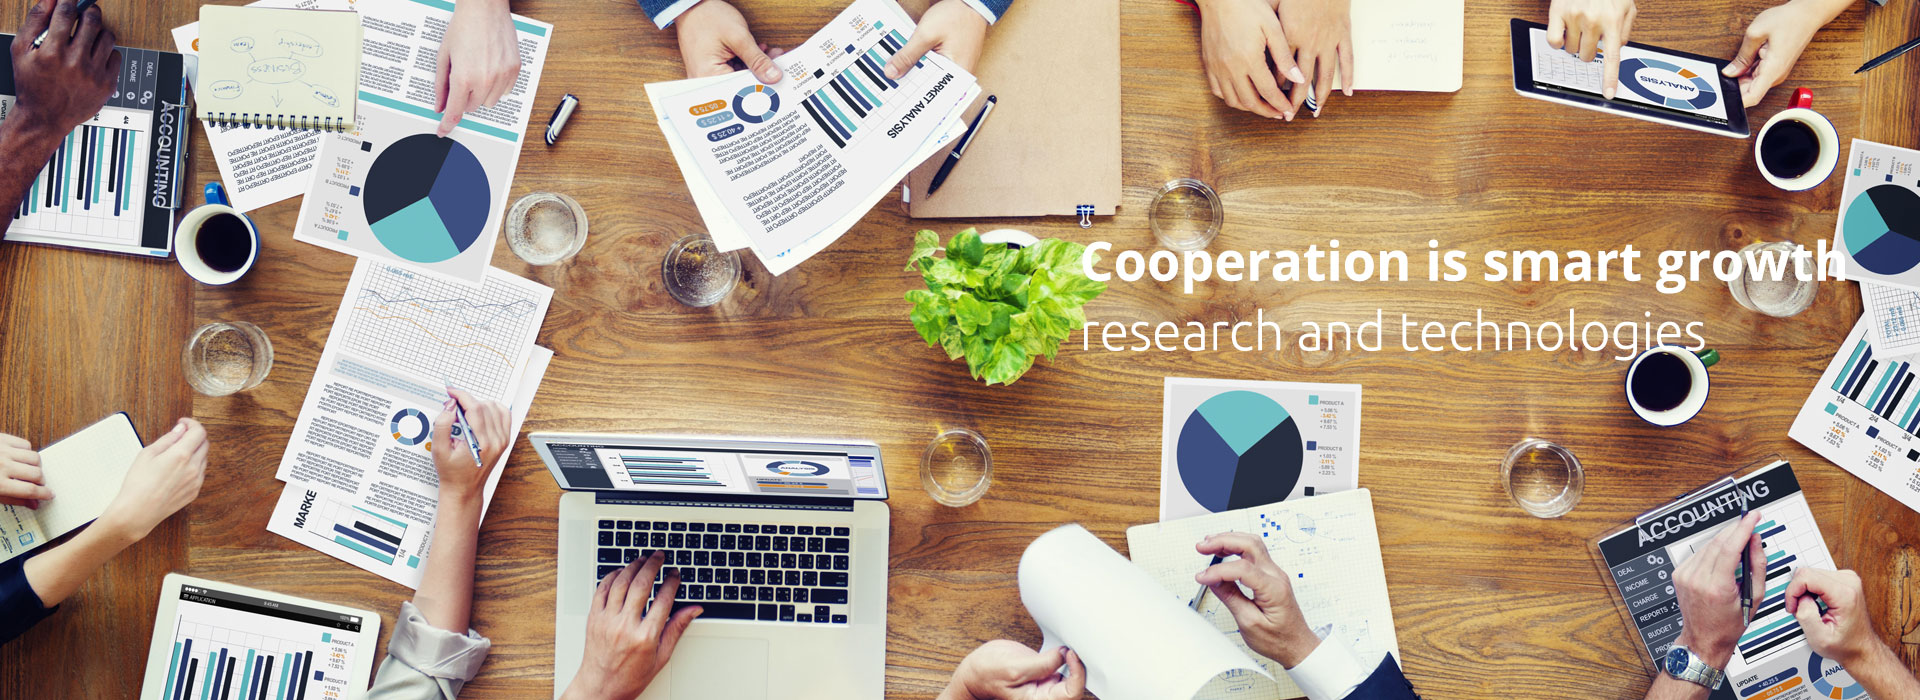 Cooperation is smart growth  research and technologies